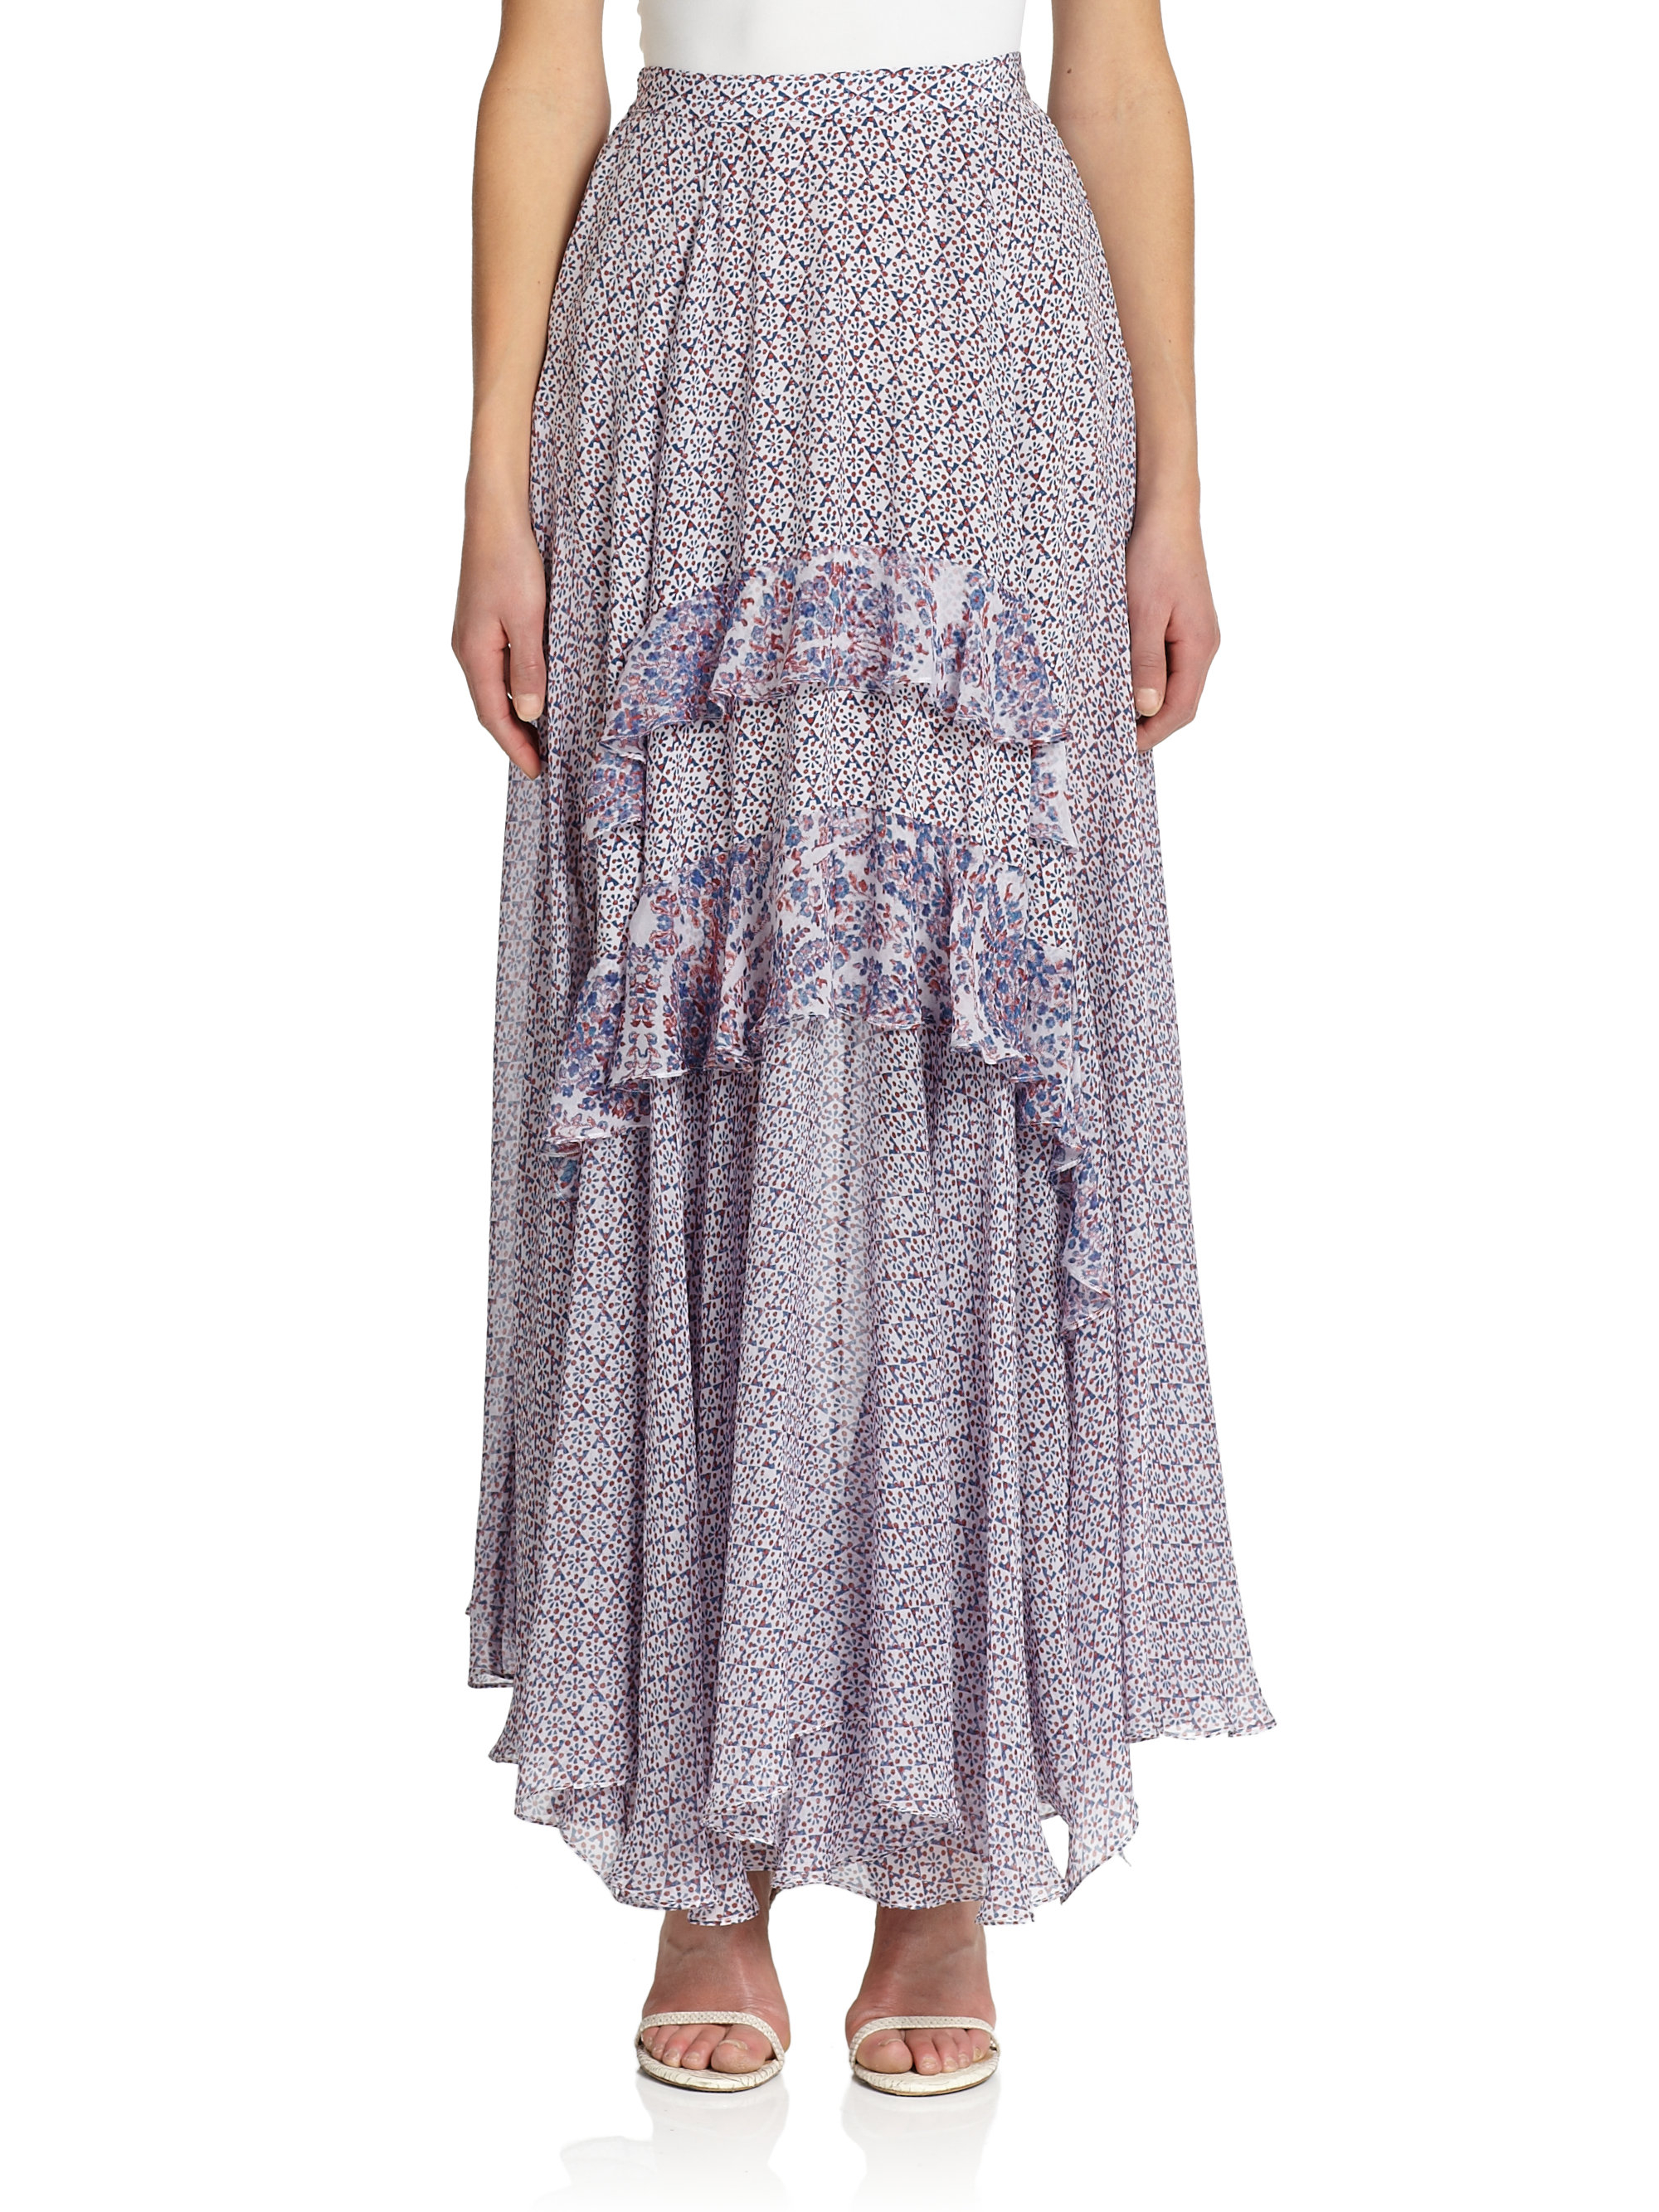 Lyst - Rebecca Taylor Paisley-Trimmed Ruffled Maxi Skirt